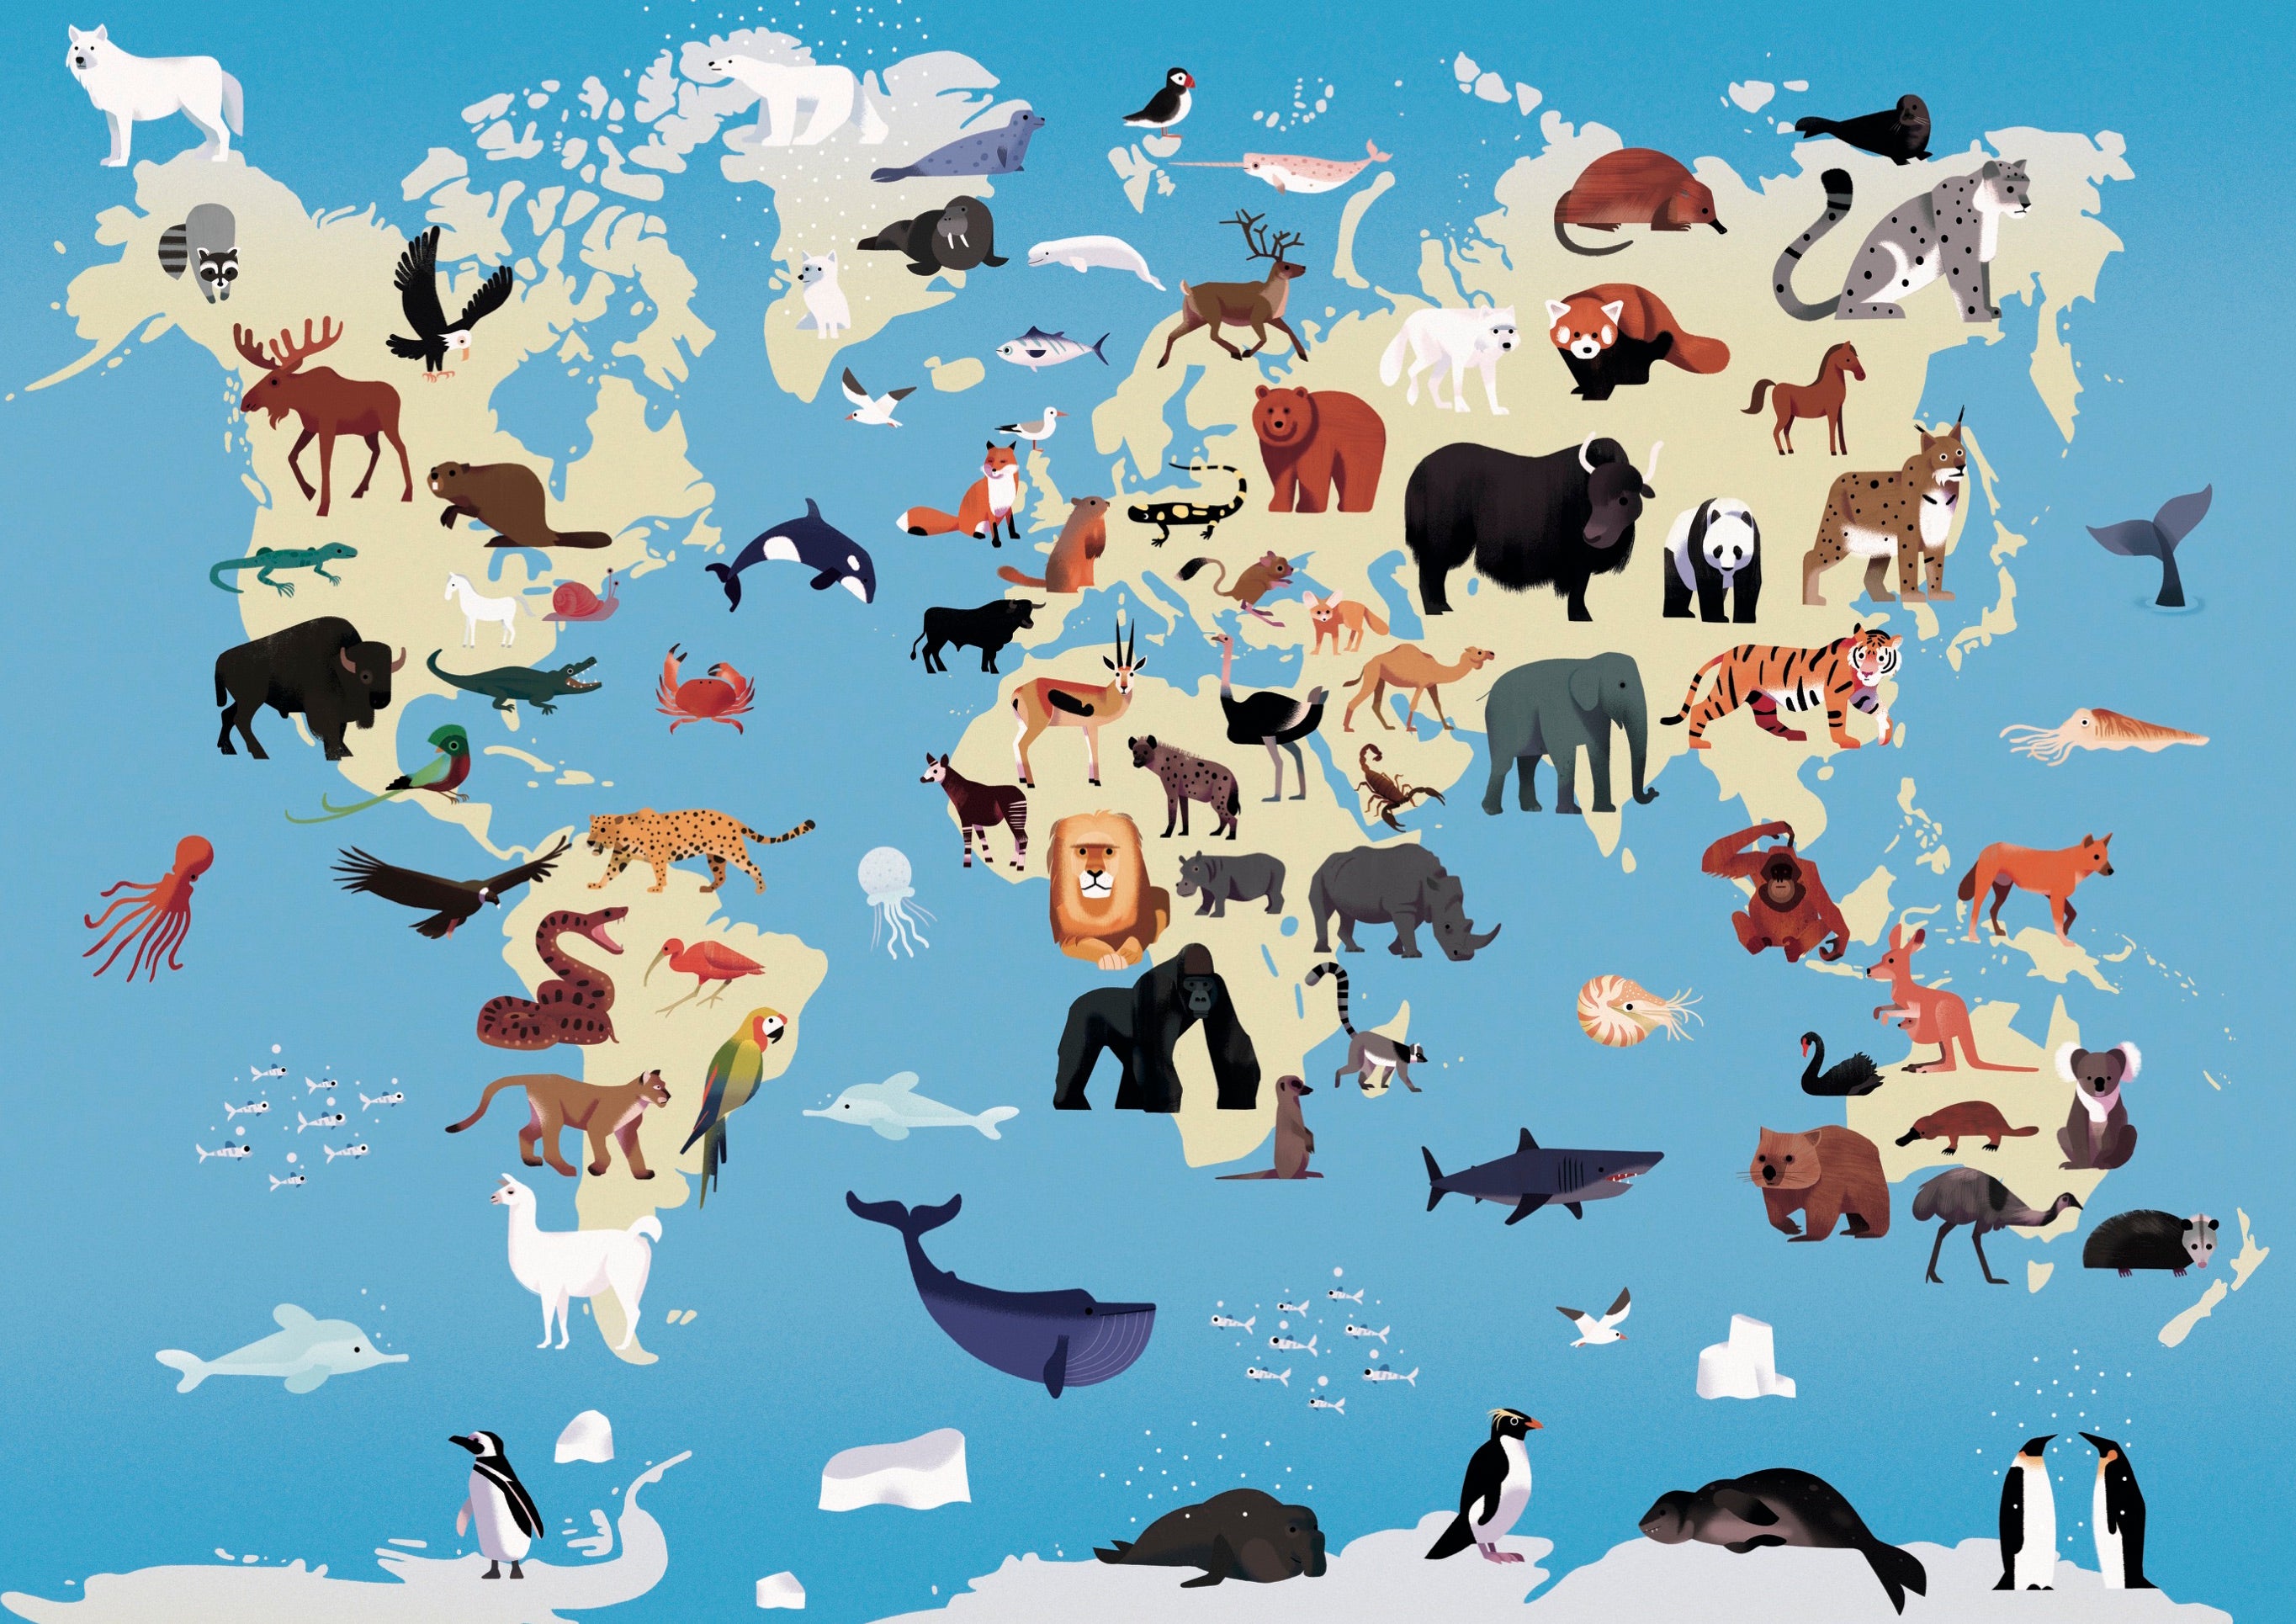 500 piece puzzle - Animals of the World 